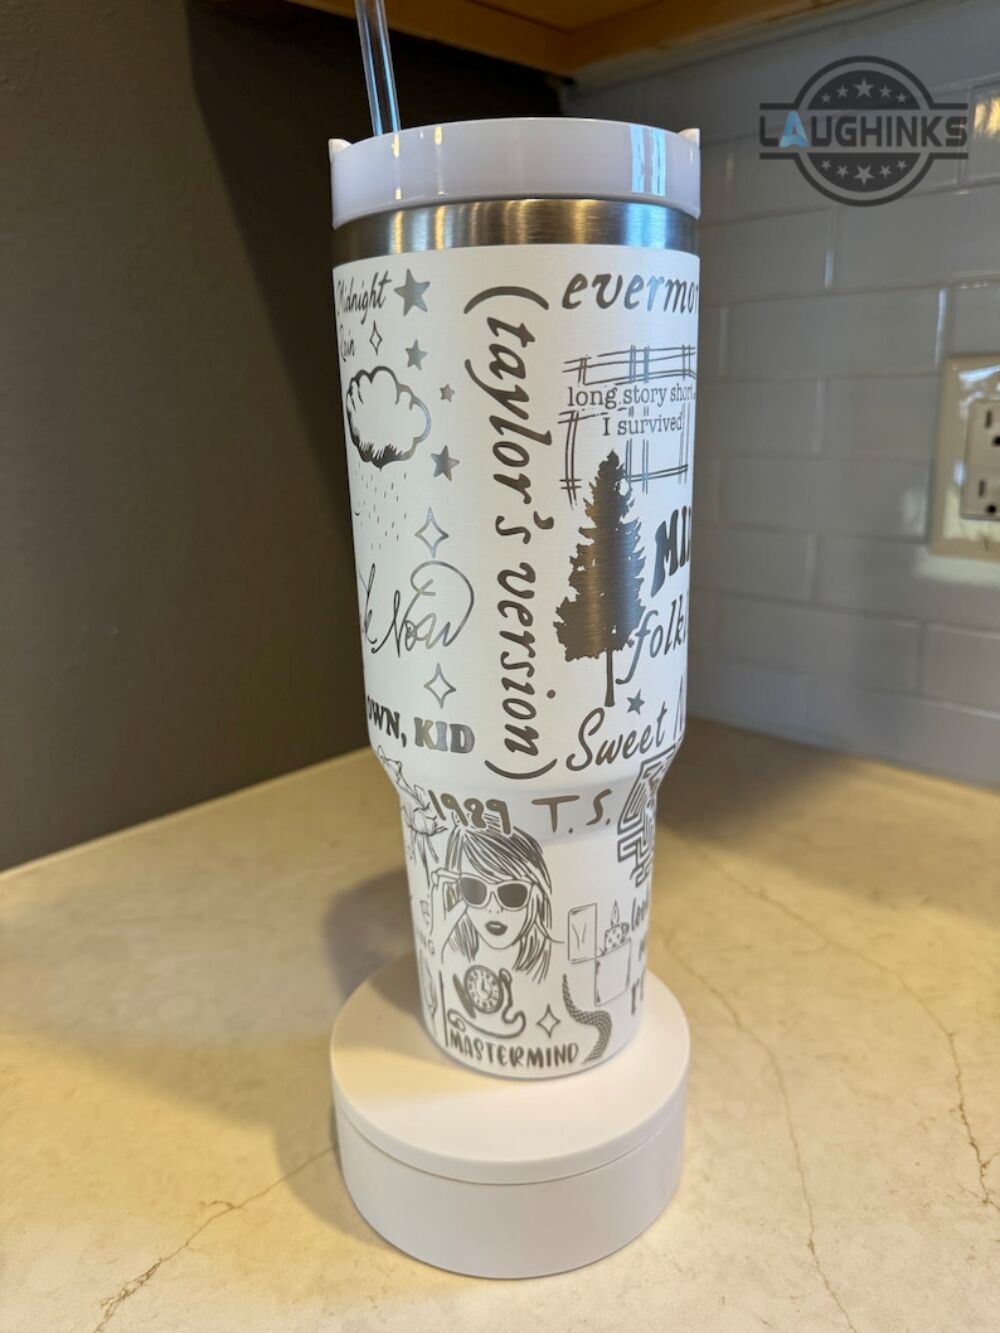 Lover Stanley Cup 40 Oz Taylor Swift Stanley Tumbler Dupe 40Oz The Eras  Tour Engraved Stainless Steel Tumbler Valentines Gift For Swifties -  Laughinks